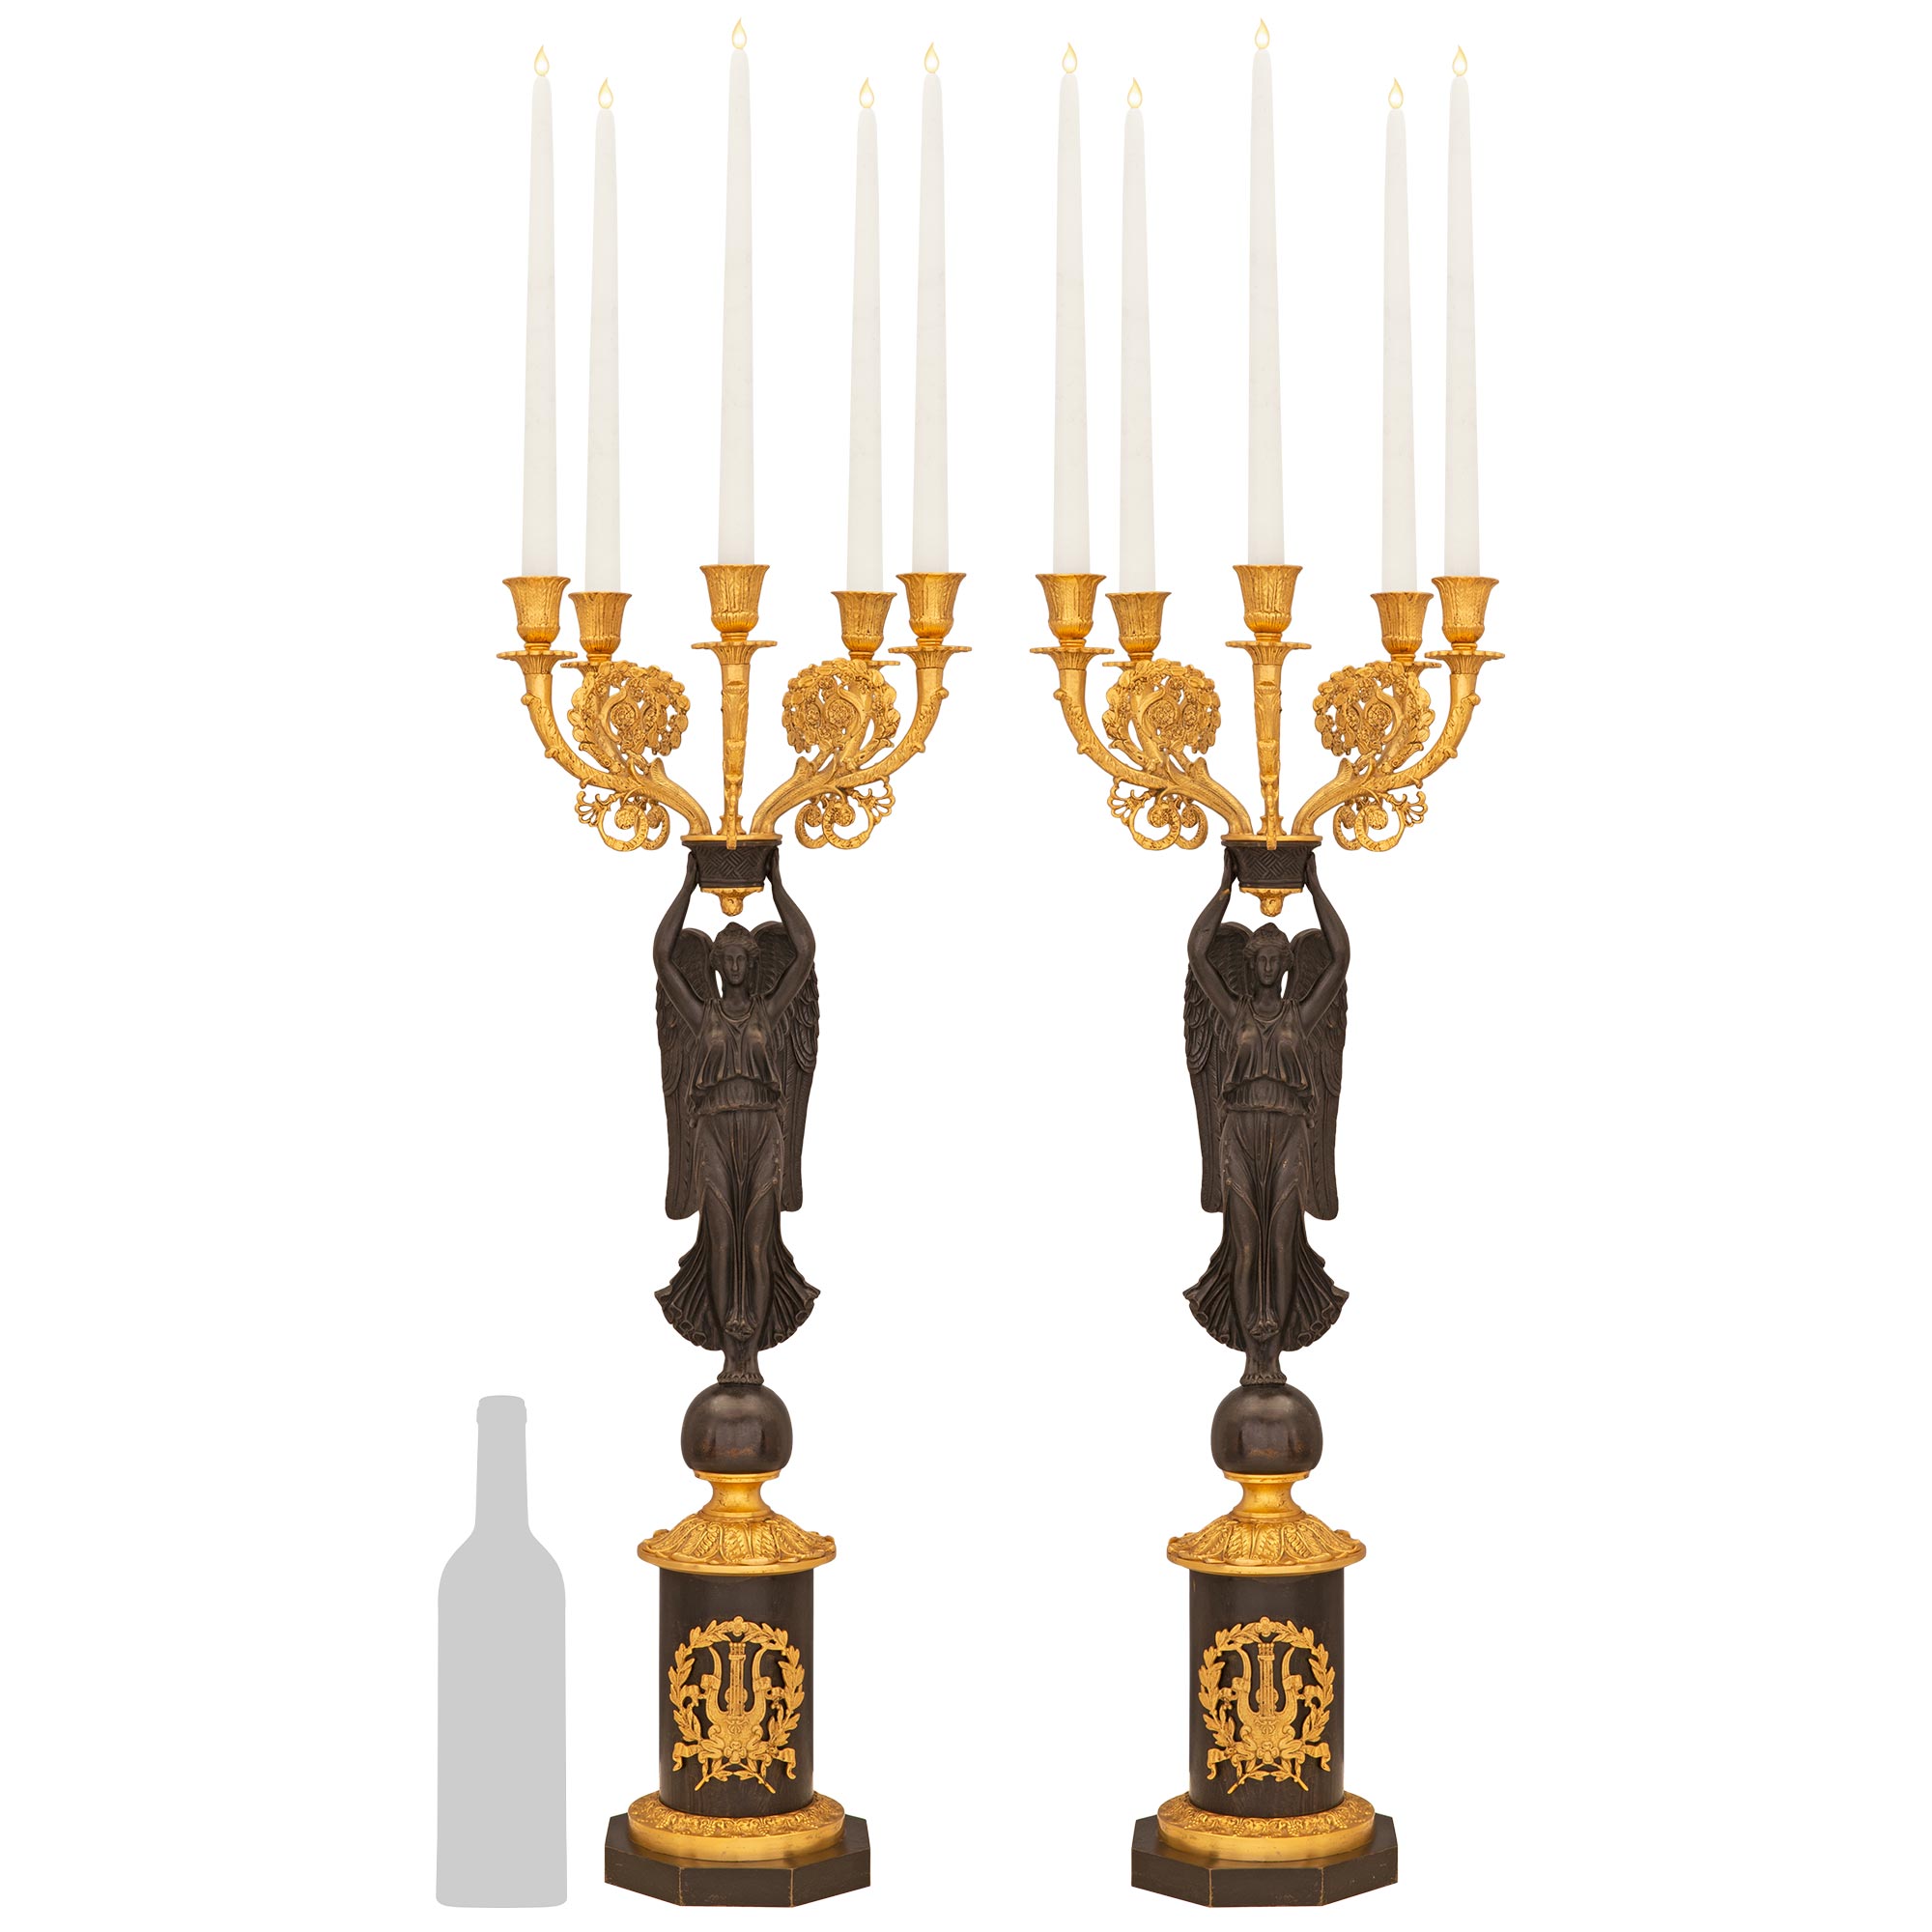 Pair of French 19th Century Neoclassical Style Five-Arm Candelabras For Sale